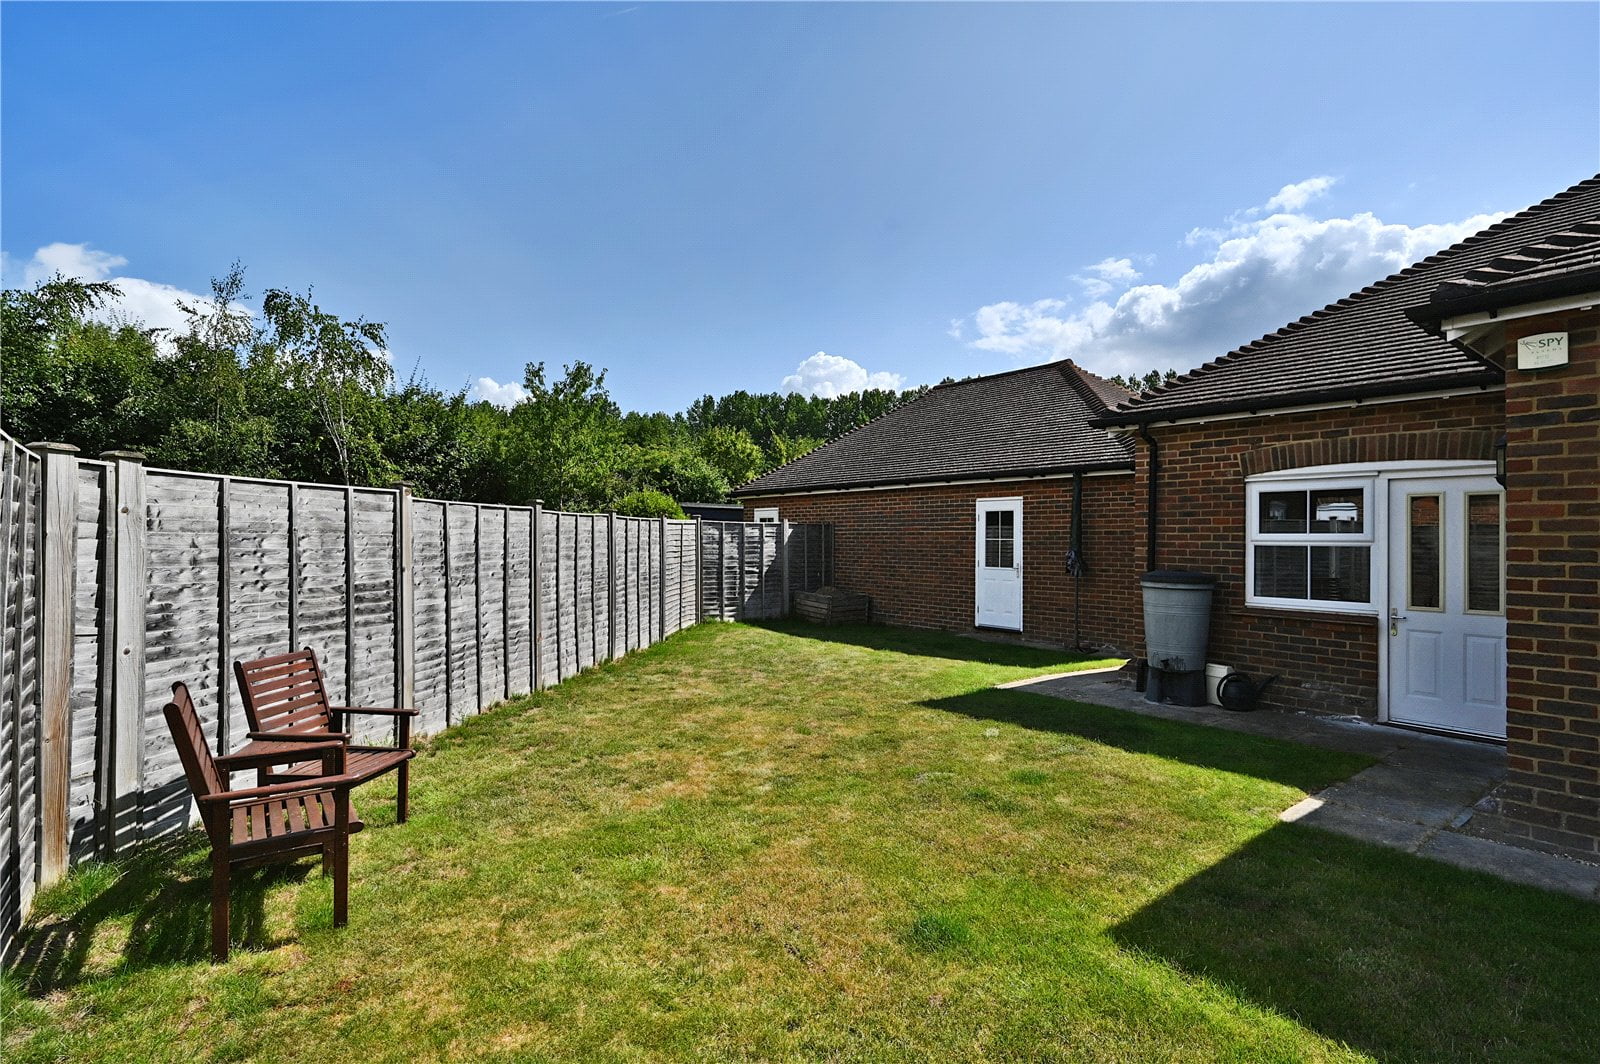 Drovers Lane, Pulborough, West Sussex,  | residential-sales